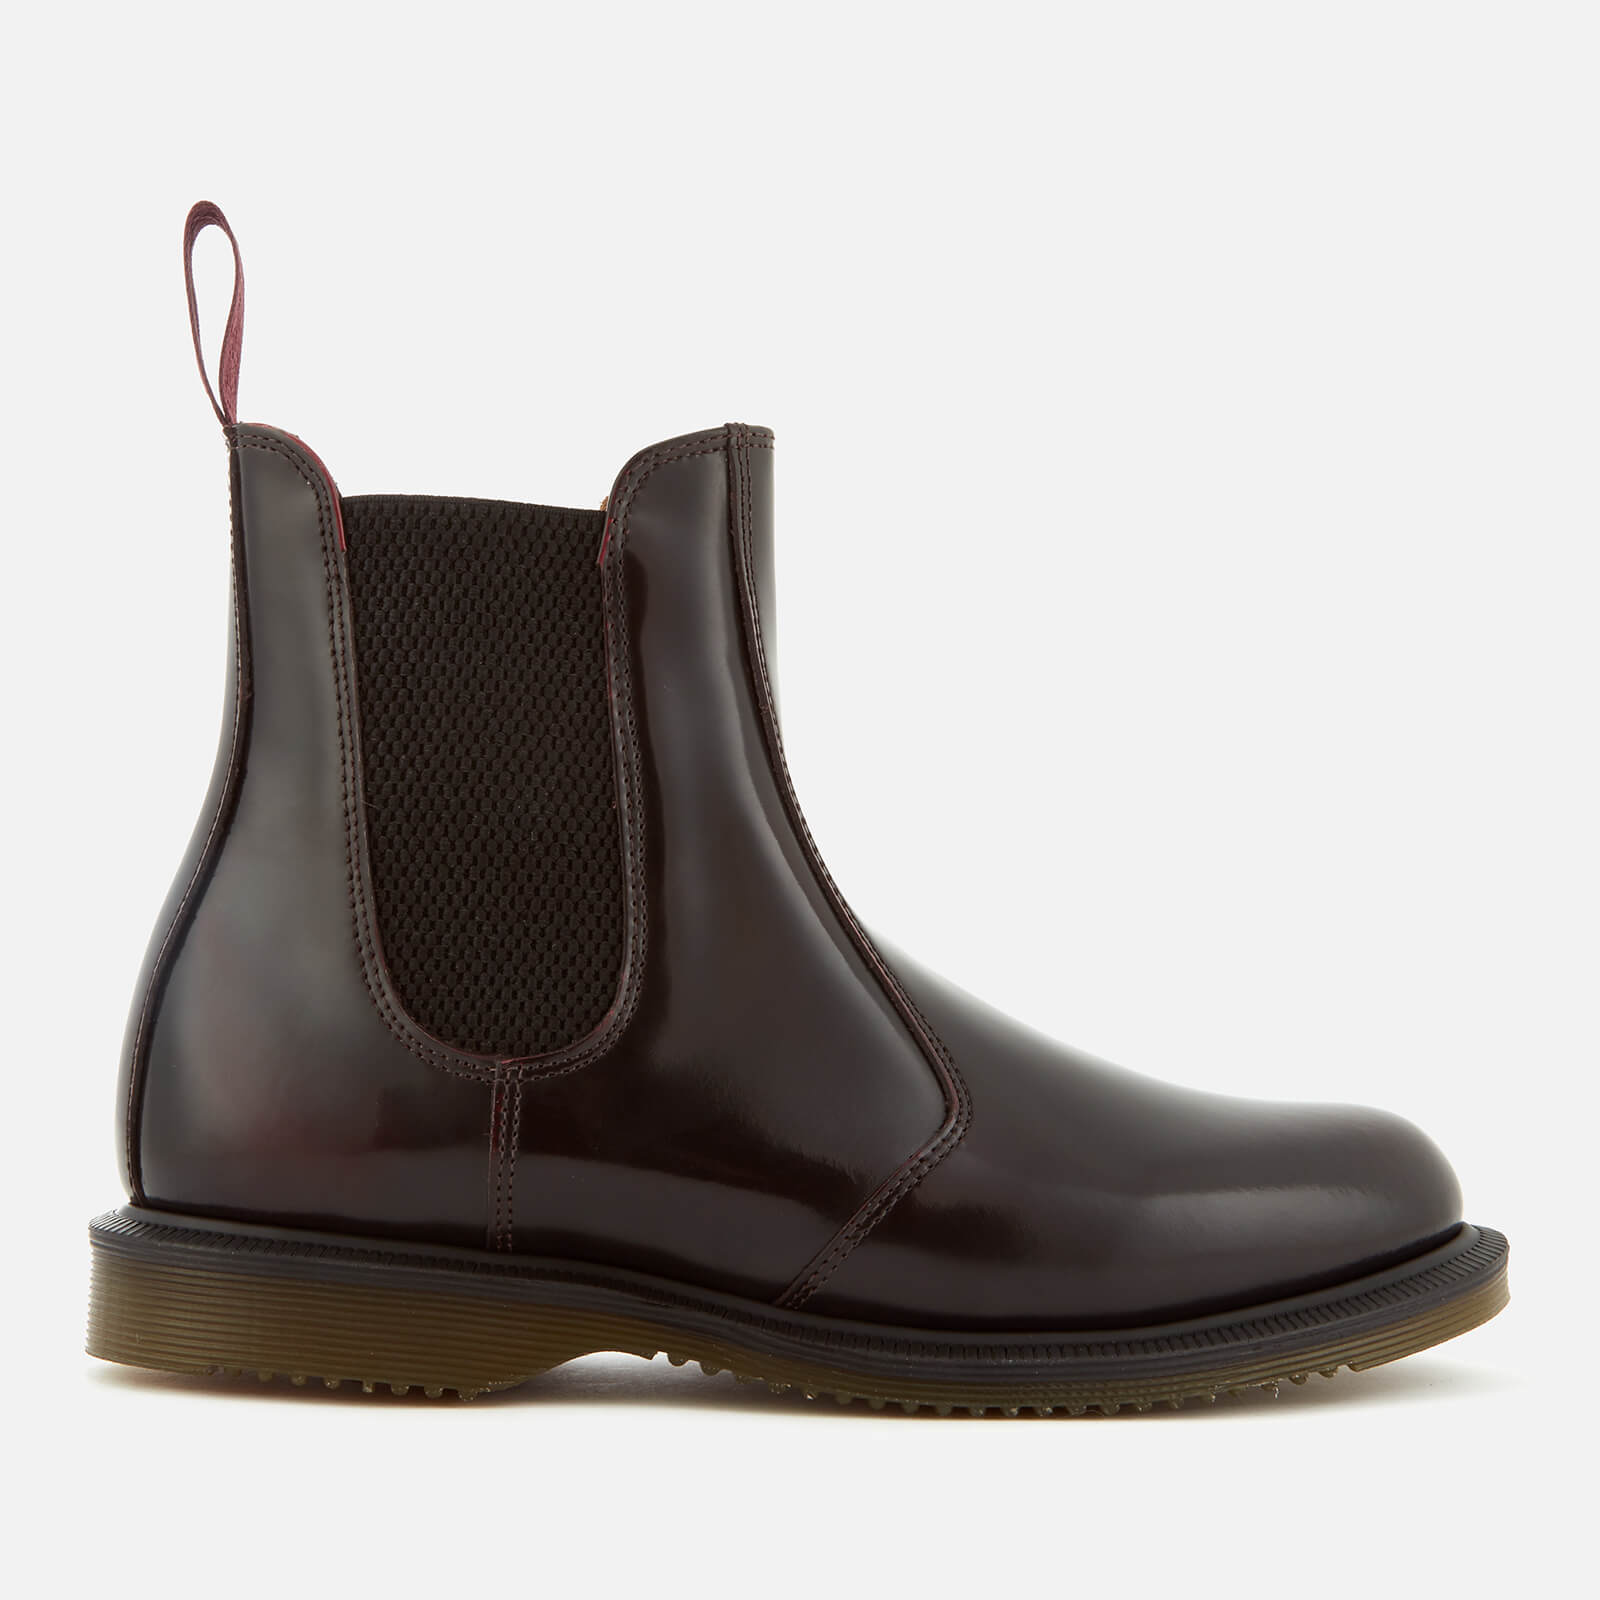 Dr. Martens Women's Flora Arcadia Leather Leather Chelsea Boots - Cherry Red - UK 7 - Burgundy